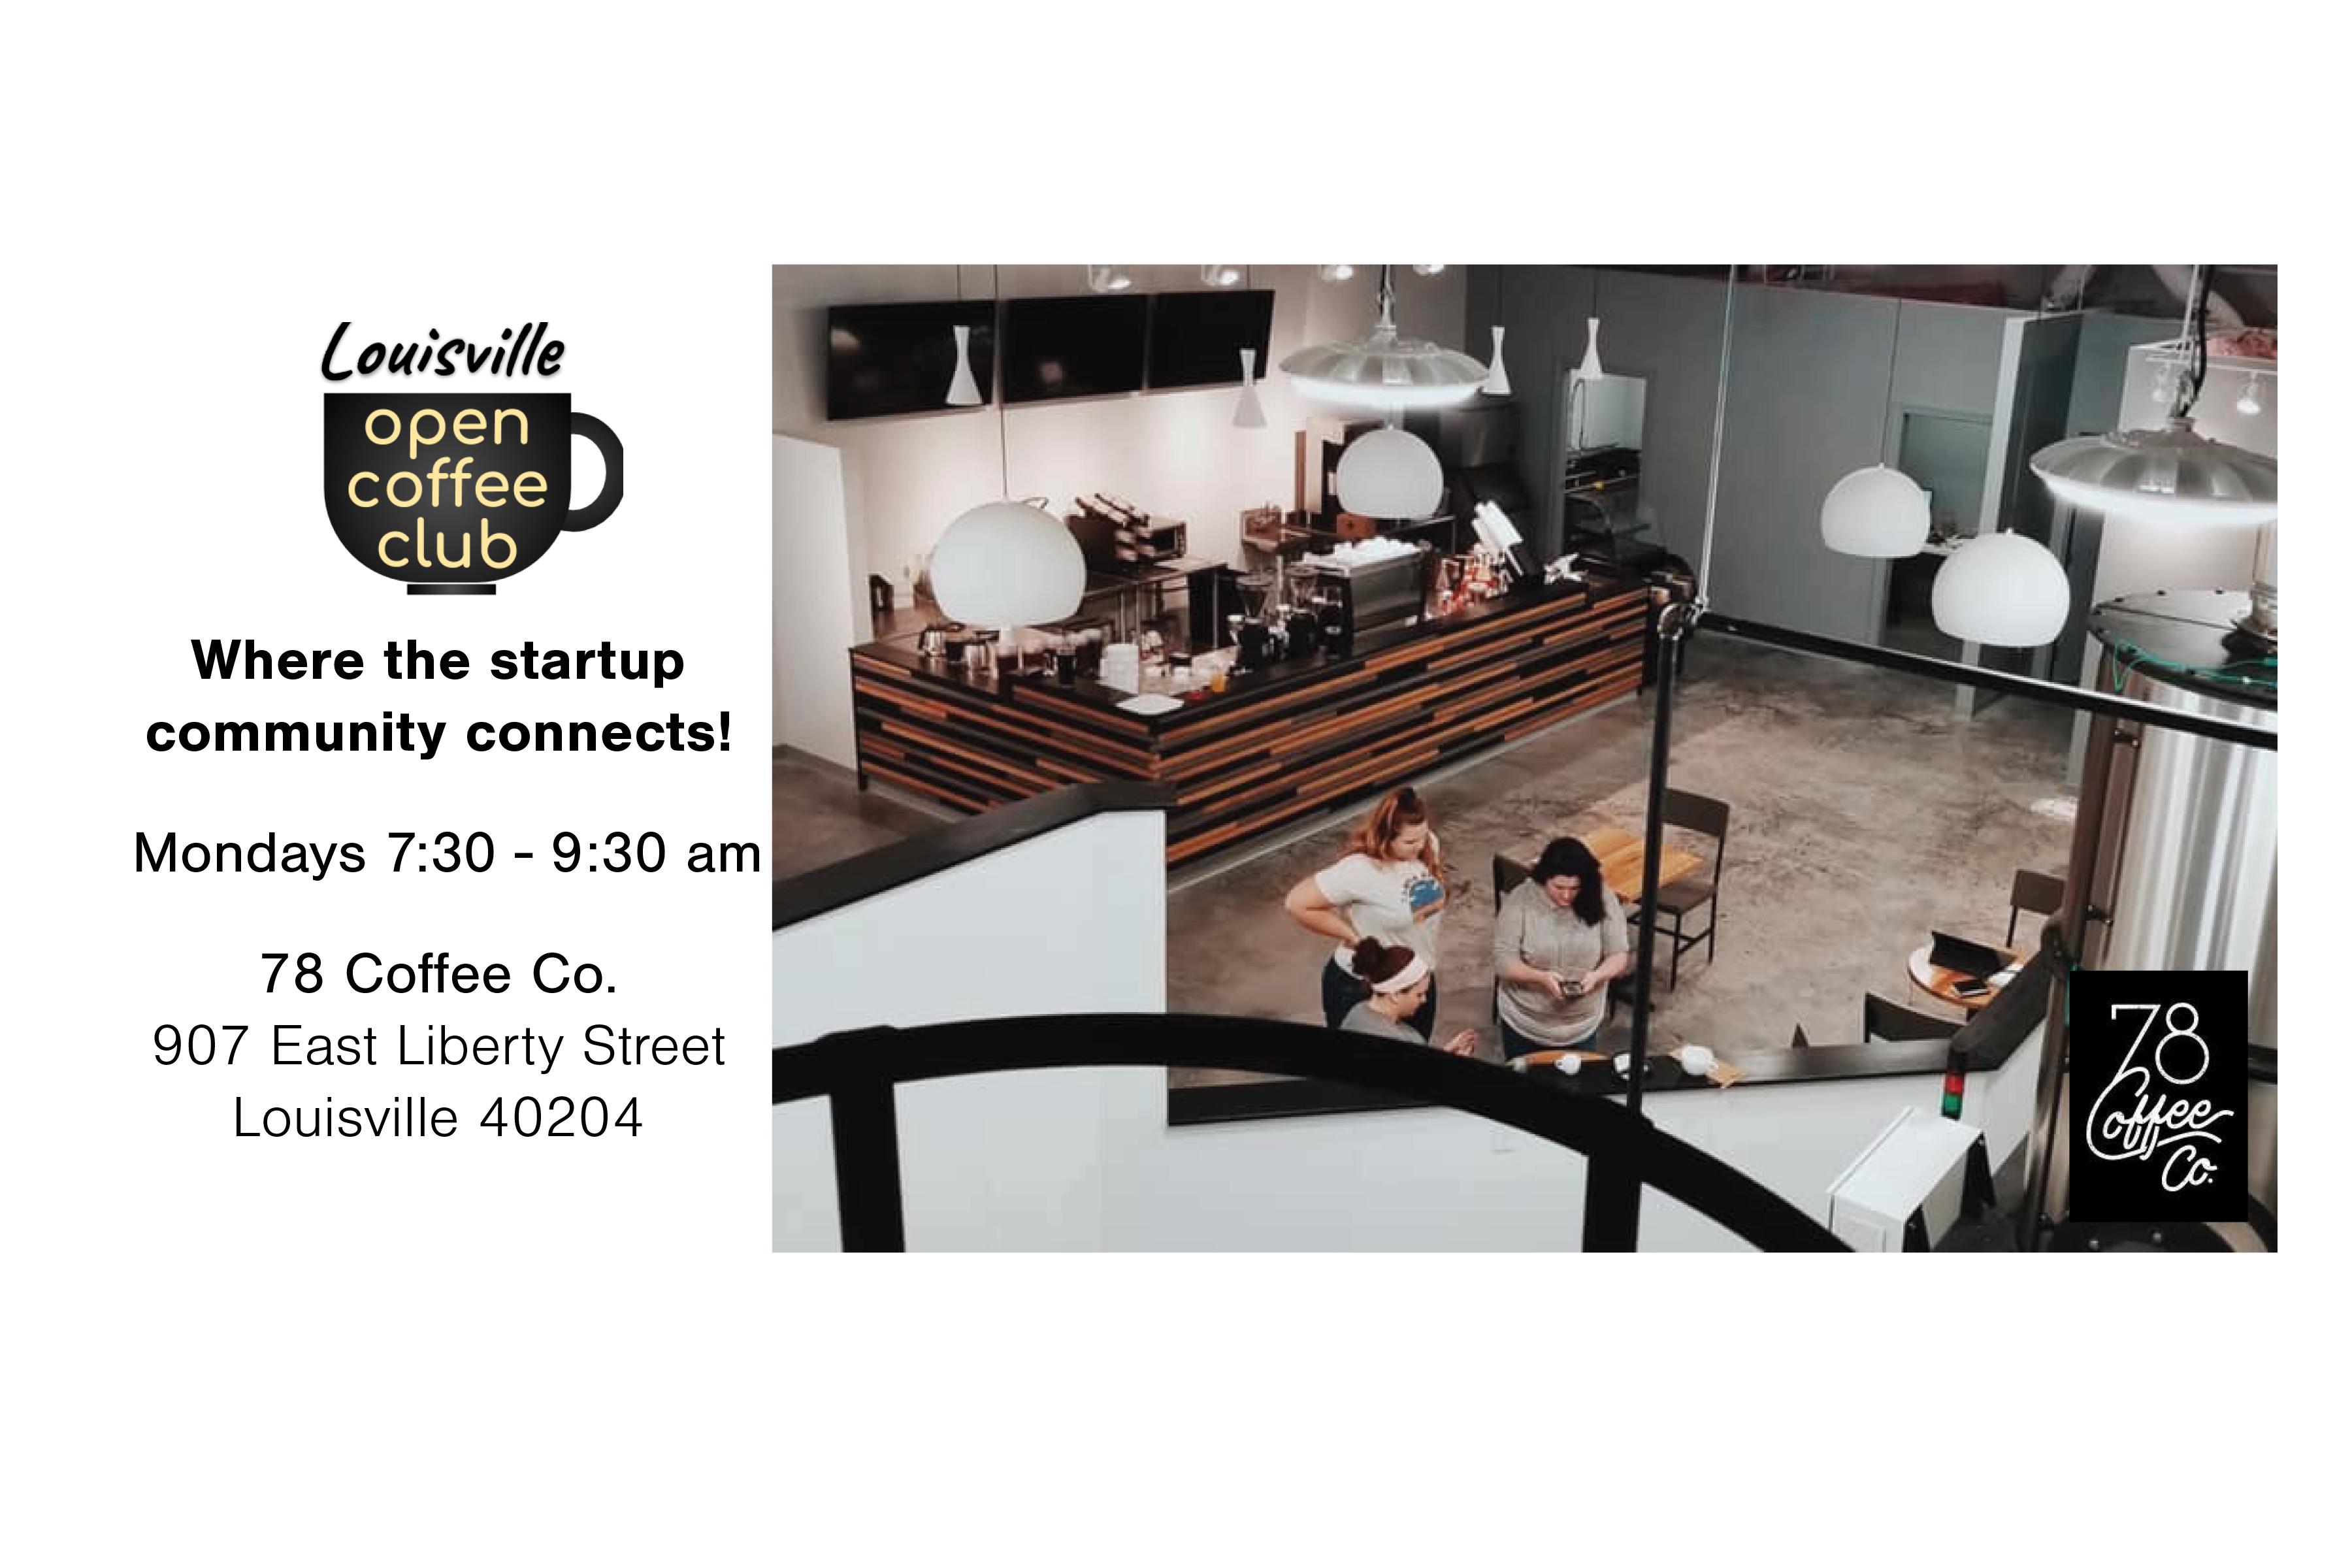 Louisville Open Coffee Club: Where the startup community connects